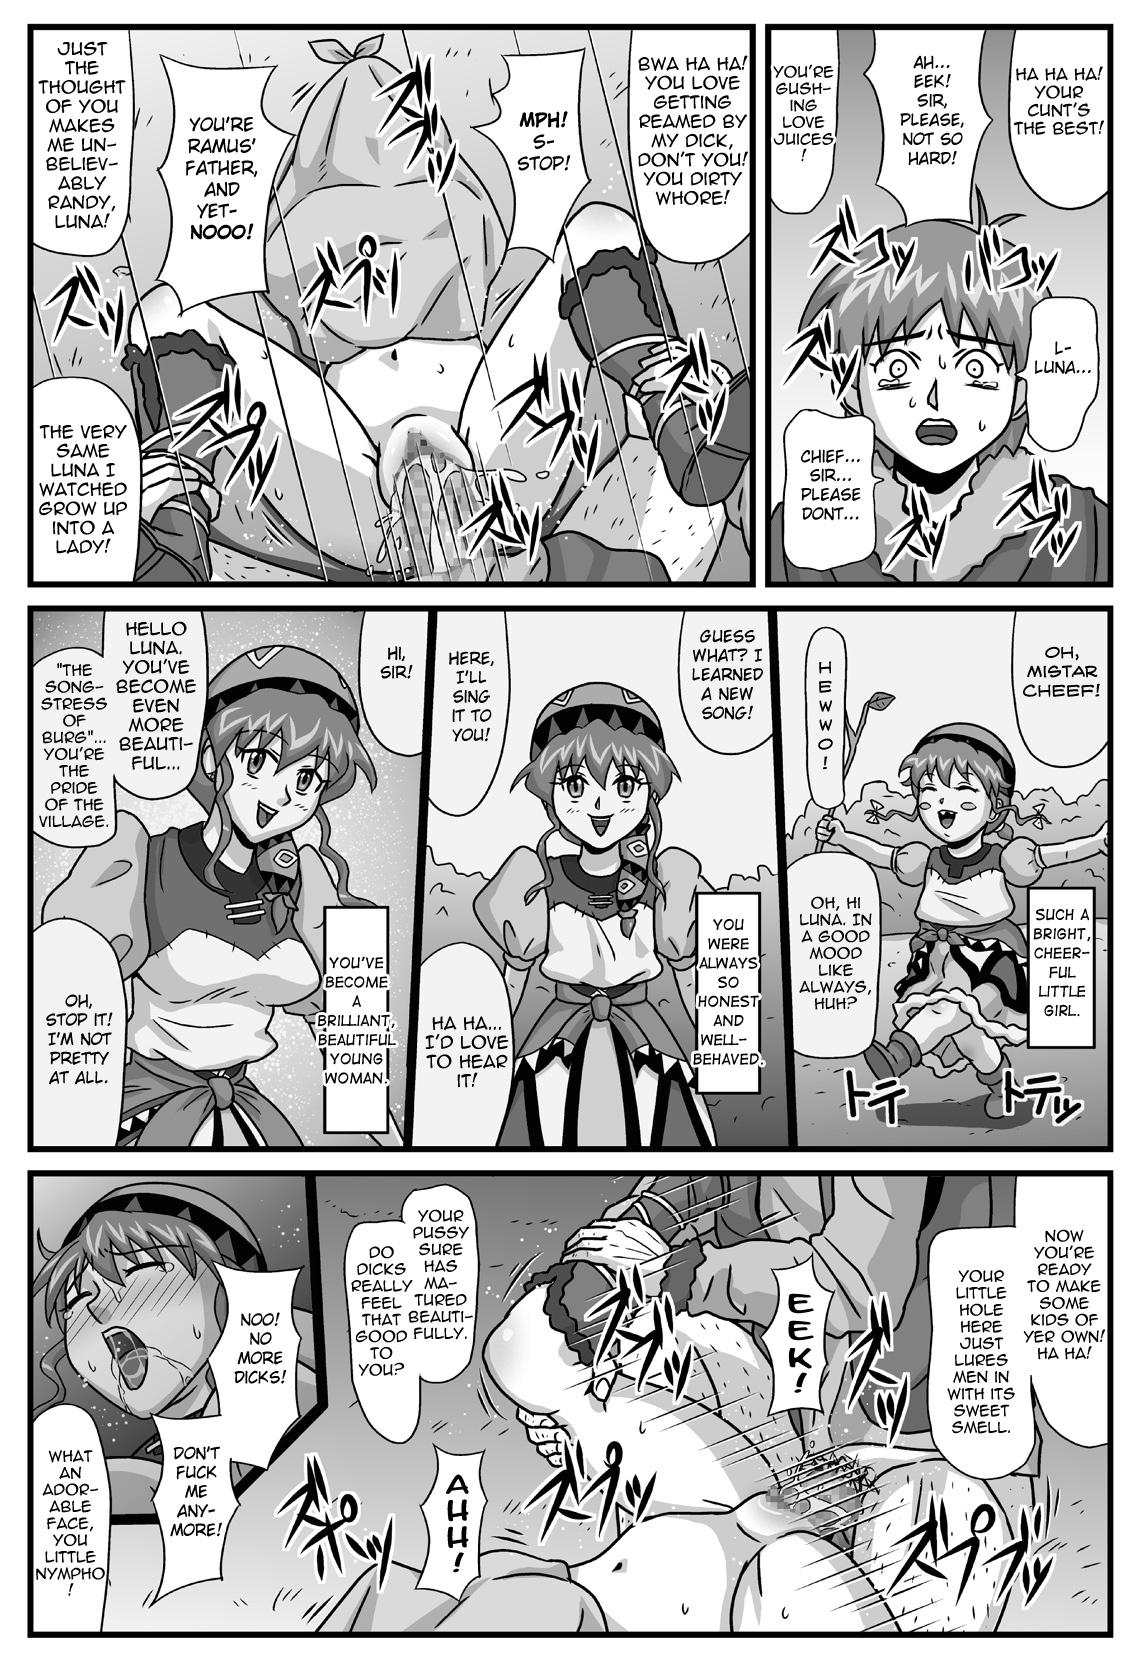 White Girl The Cumdumpster Princess of Burg 02 - Lunar silver star story Fitness - Page 9